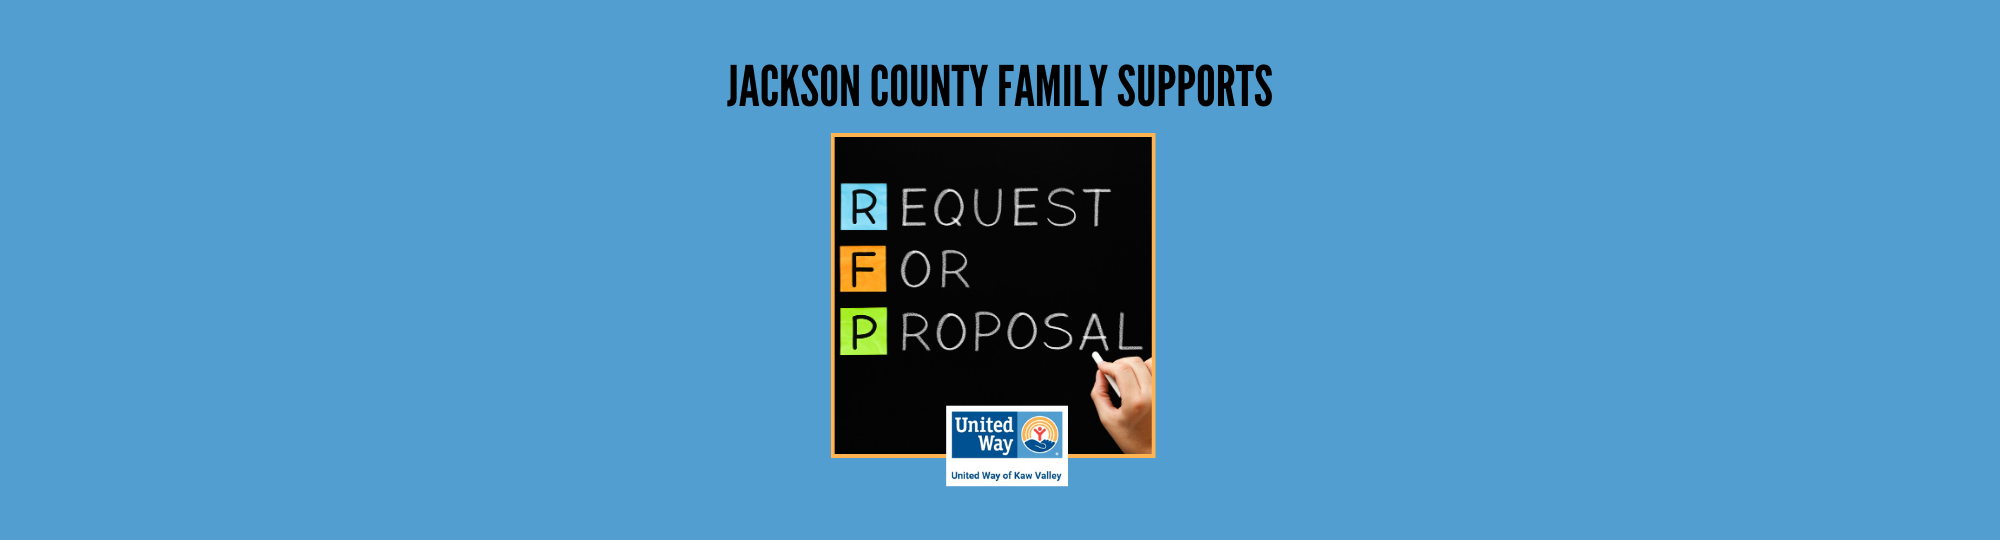 Jackson County Request for Proposal